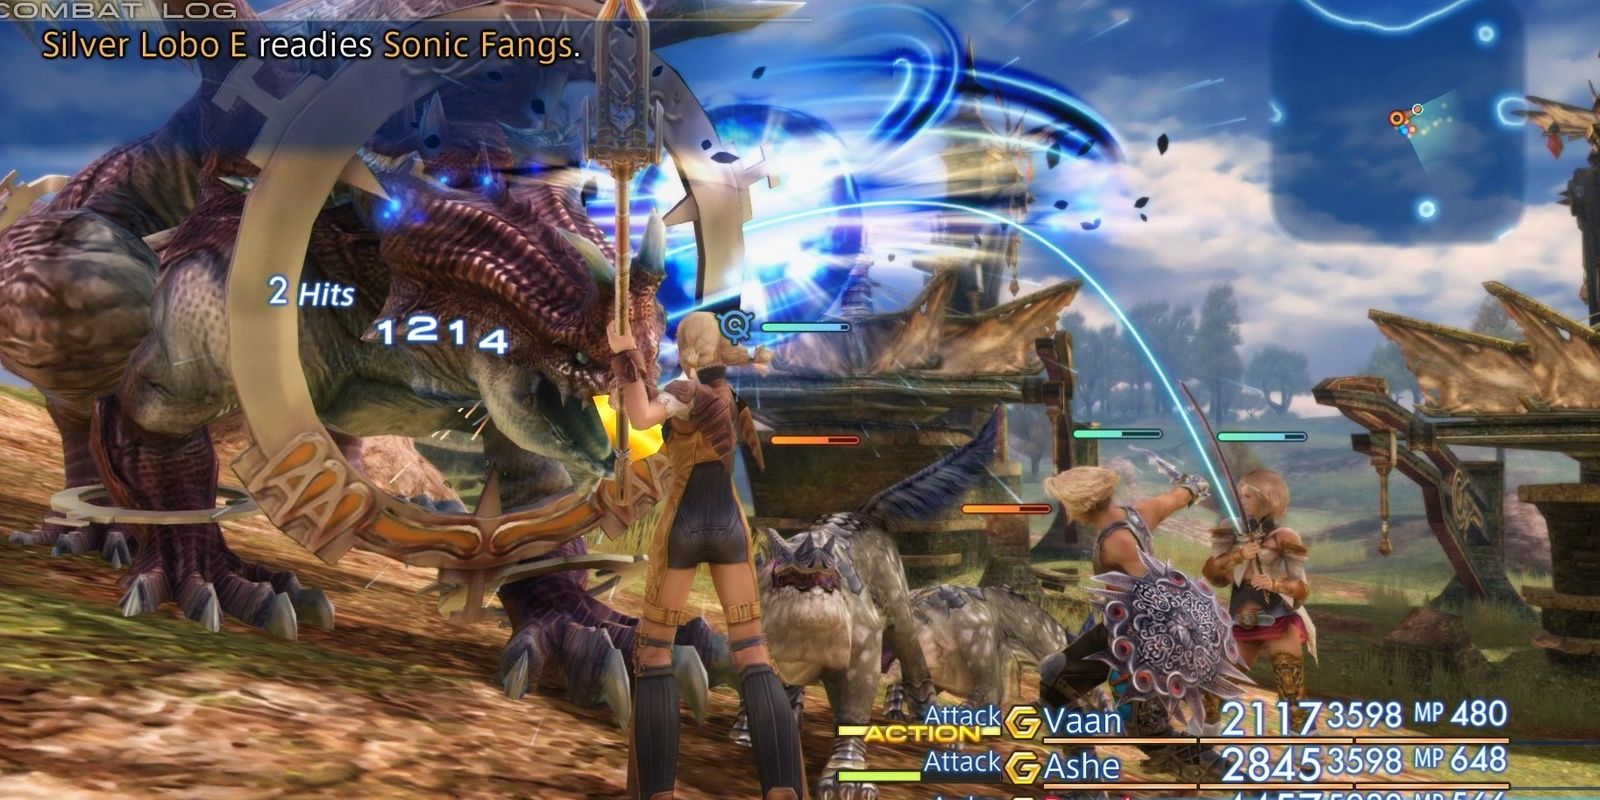 the party from final fantasy 12 fighting a battle